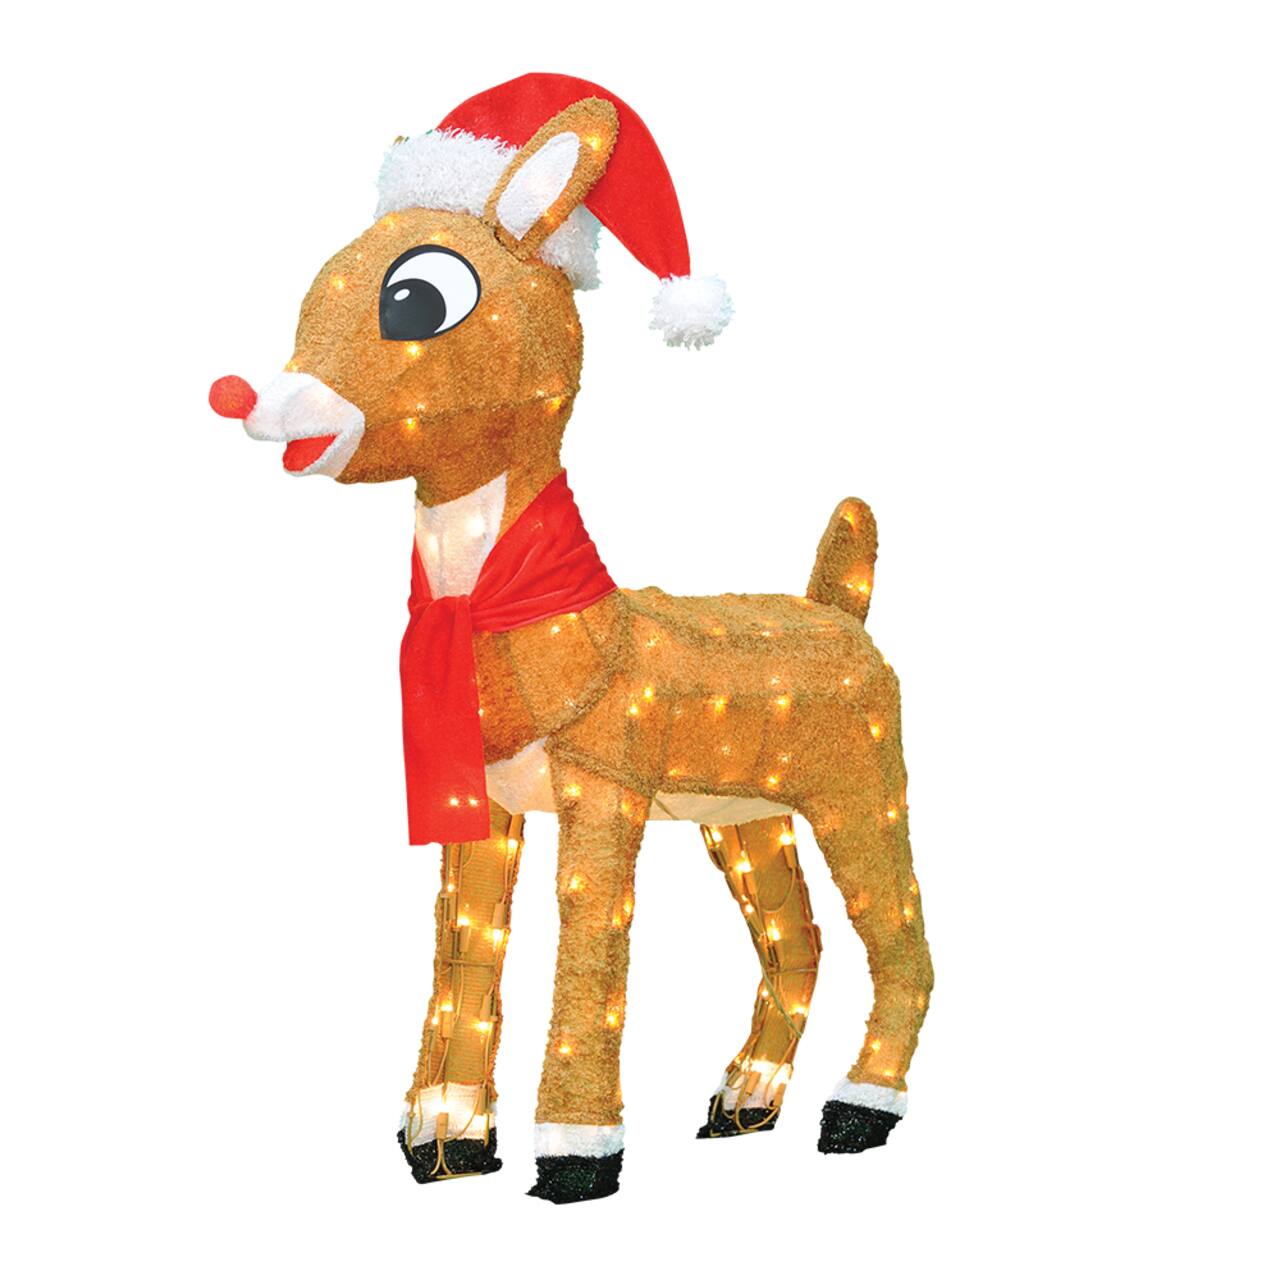 ProductWorks Rudolph 2ft. 3D Pre-Lit Rudolph with Santa Hat Scarf Yard Art